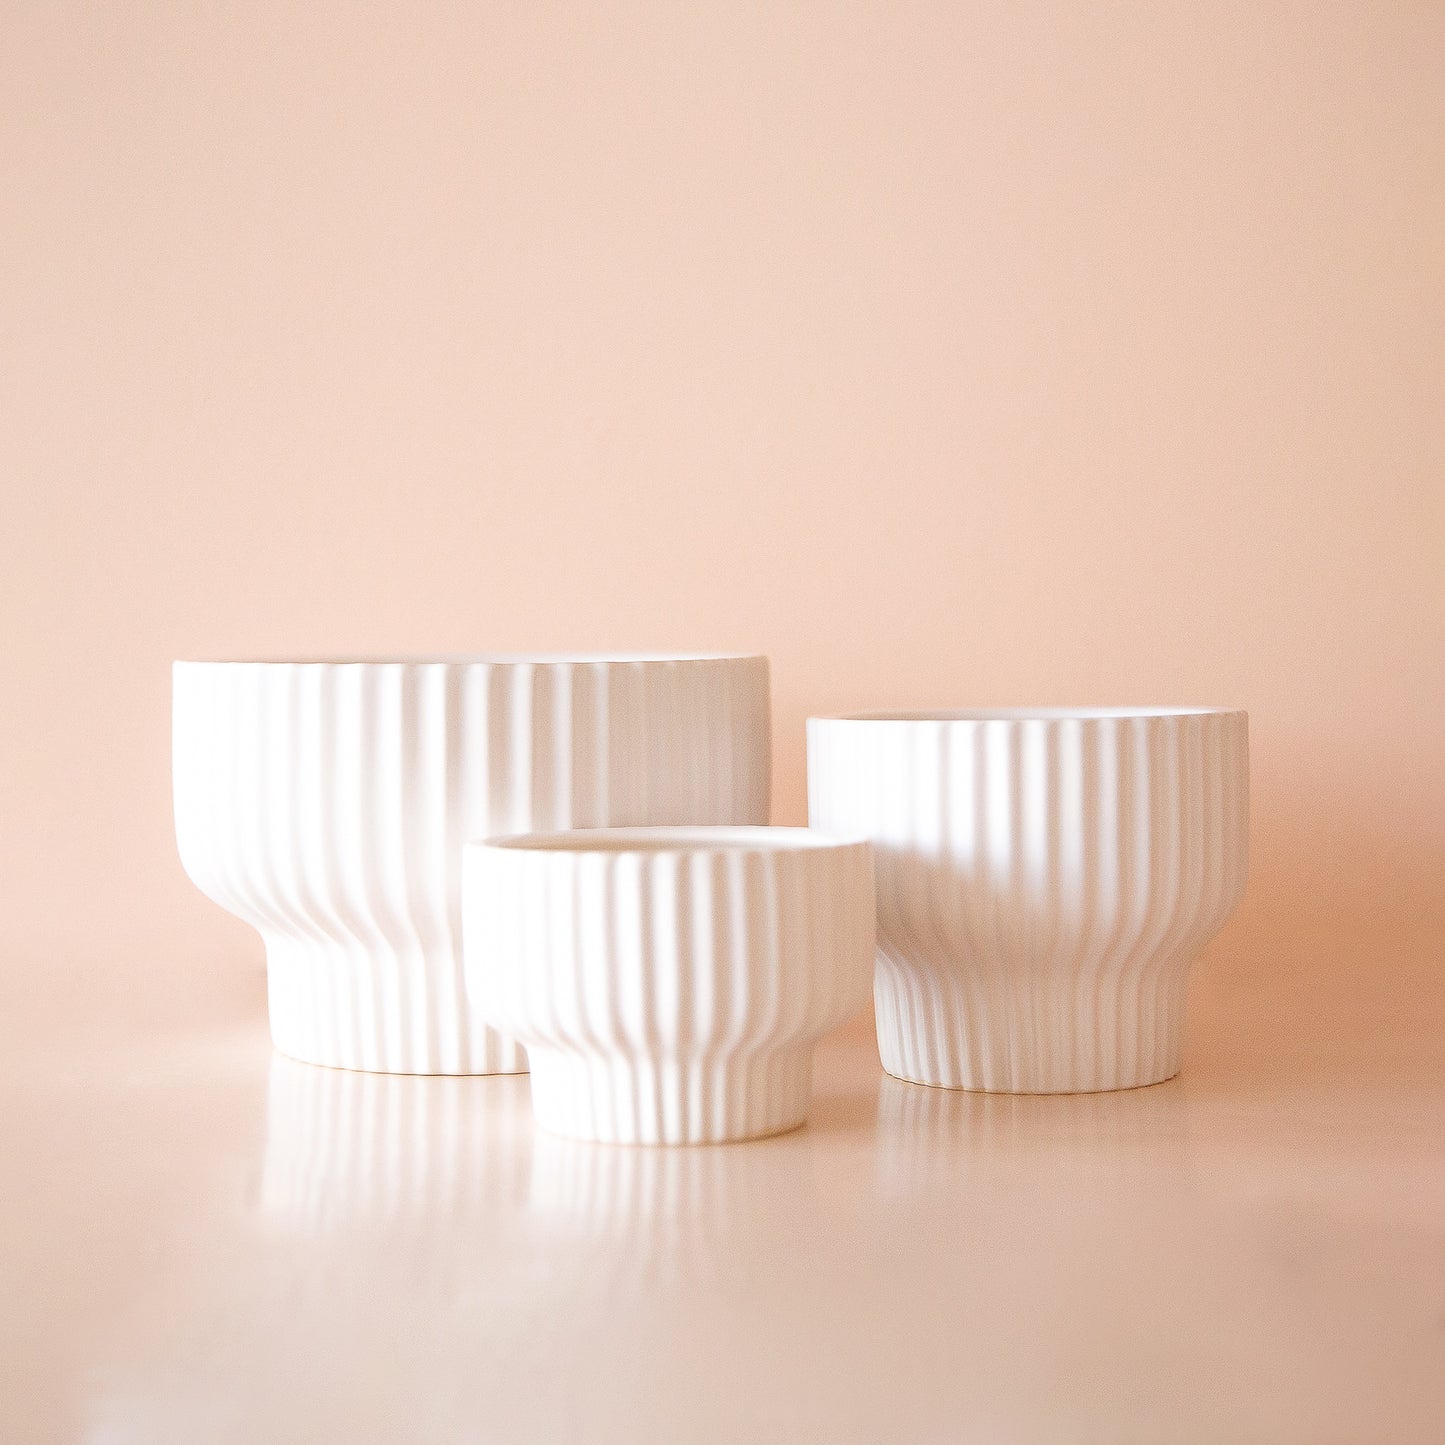 On a peachy background is a white ribbed pedestal planter in three different sizes.